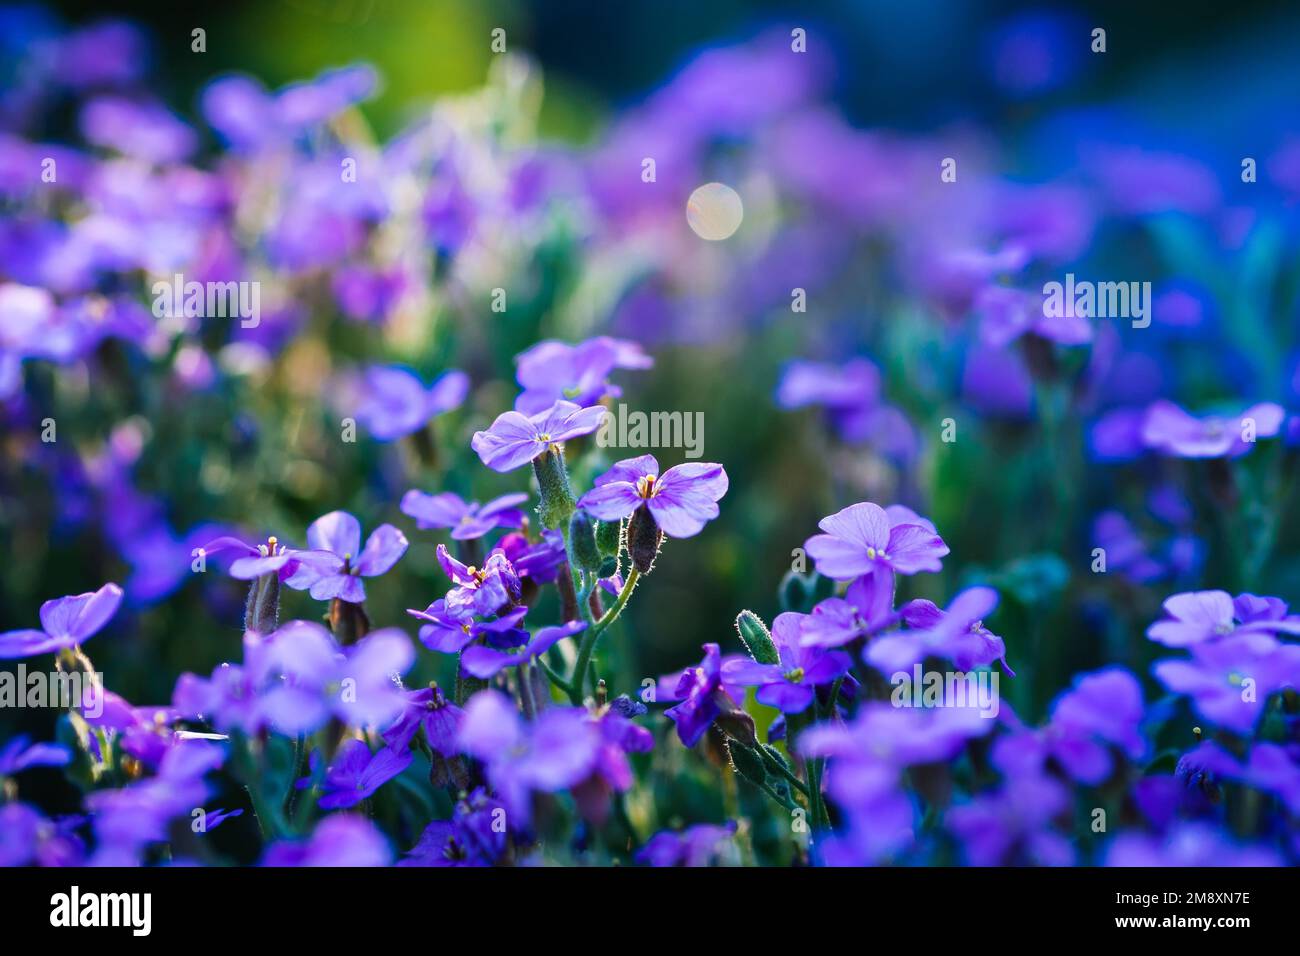 aubrieta blooming blue-violet flowers in spring garden close up Stock Photo